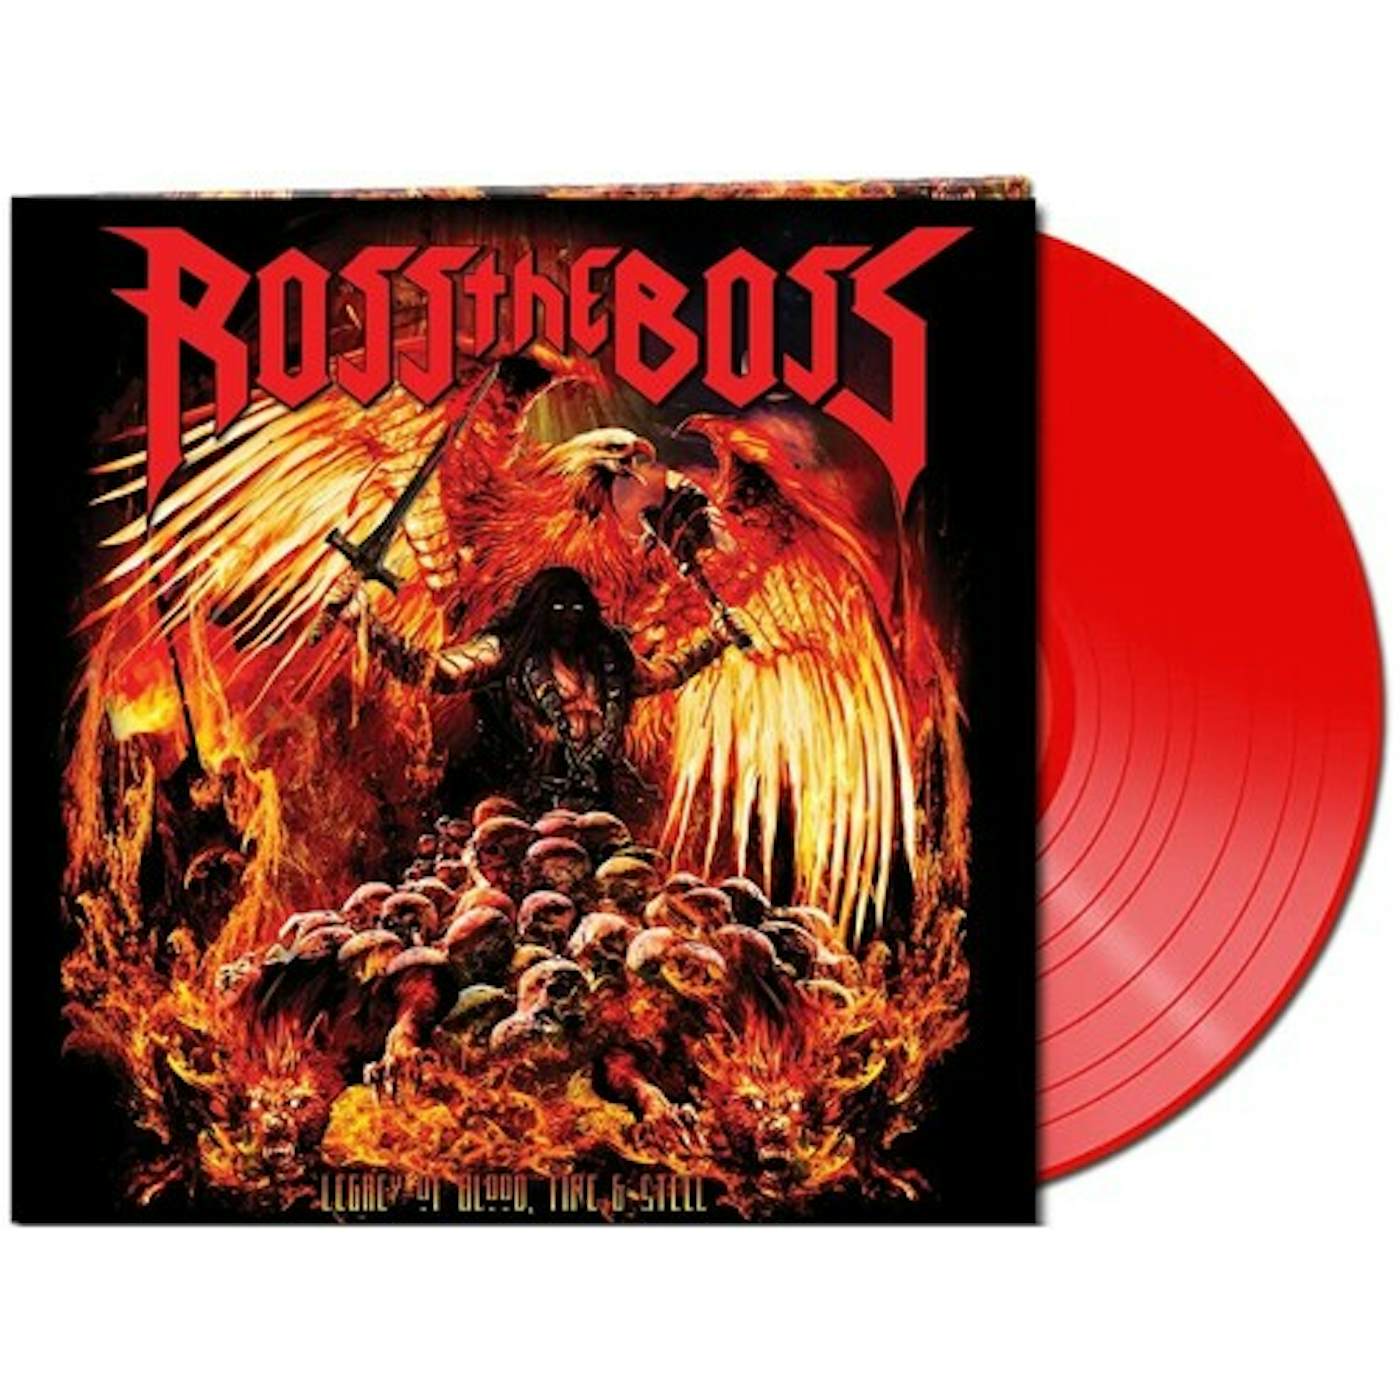 Ross The Boss LEGACY OF BLOOD FIRE & STEEL - RED Vinyl Record